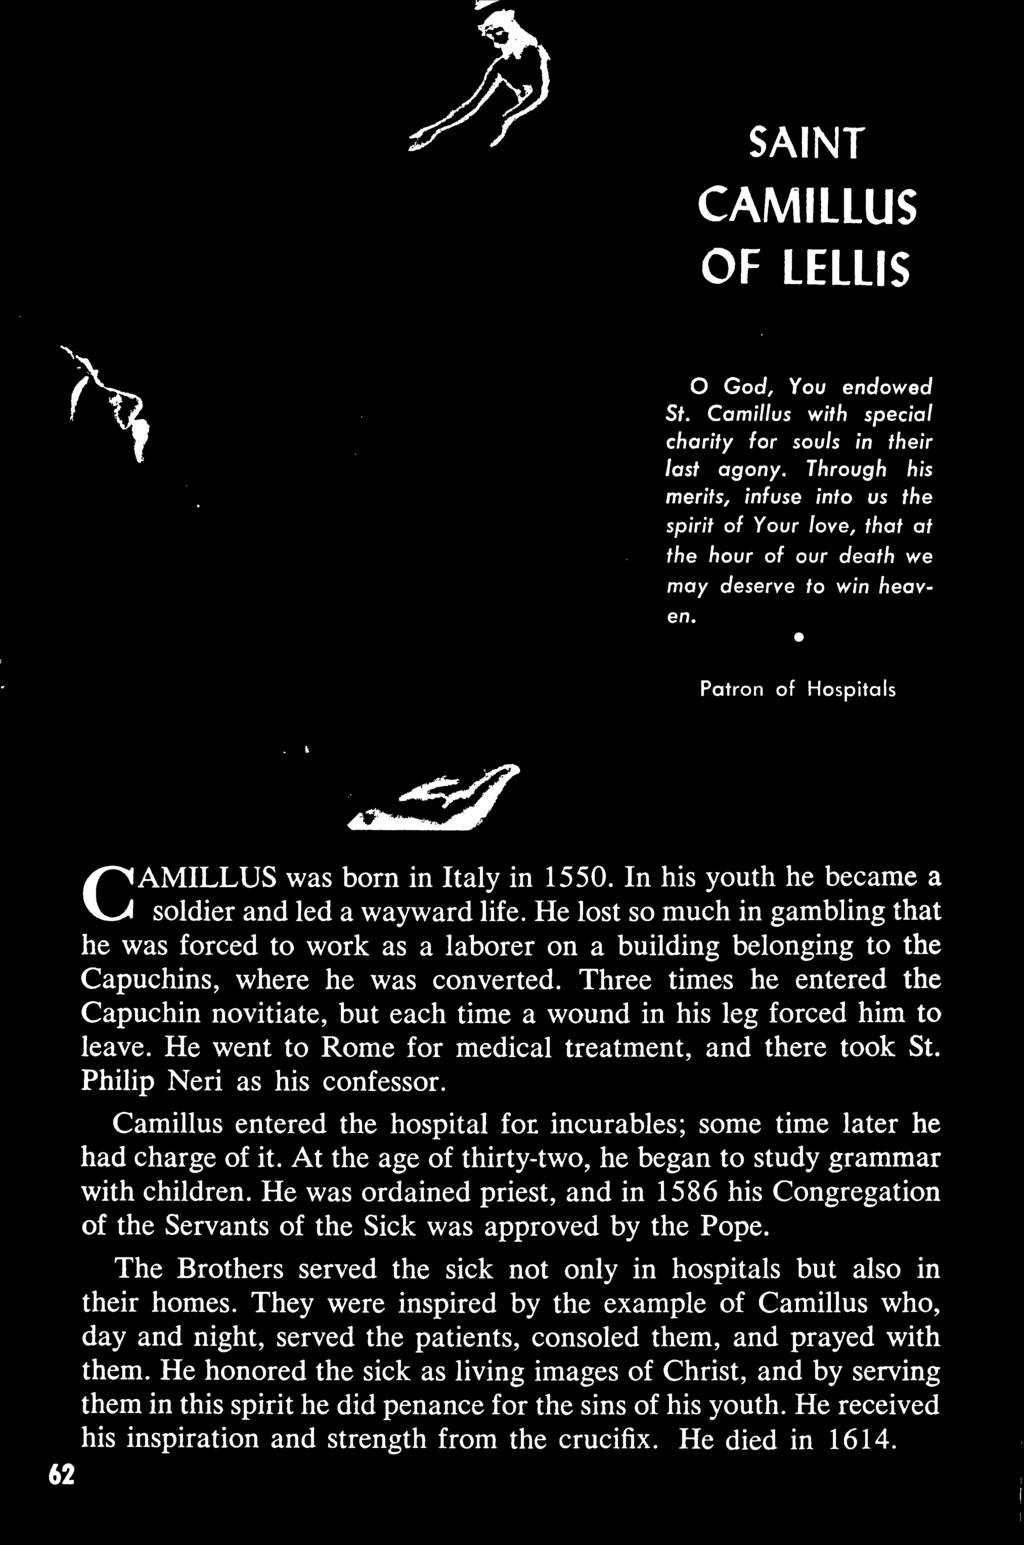 CAMILLUS OF LELLIS f* O God, You endowed St. Camillus with special charity for souls in their last agony.